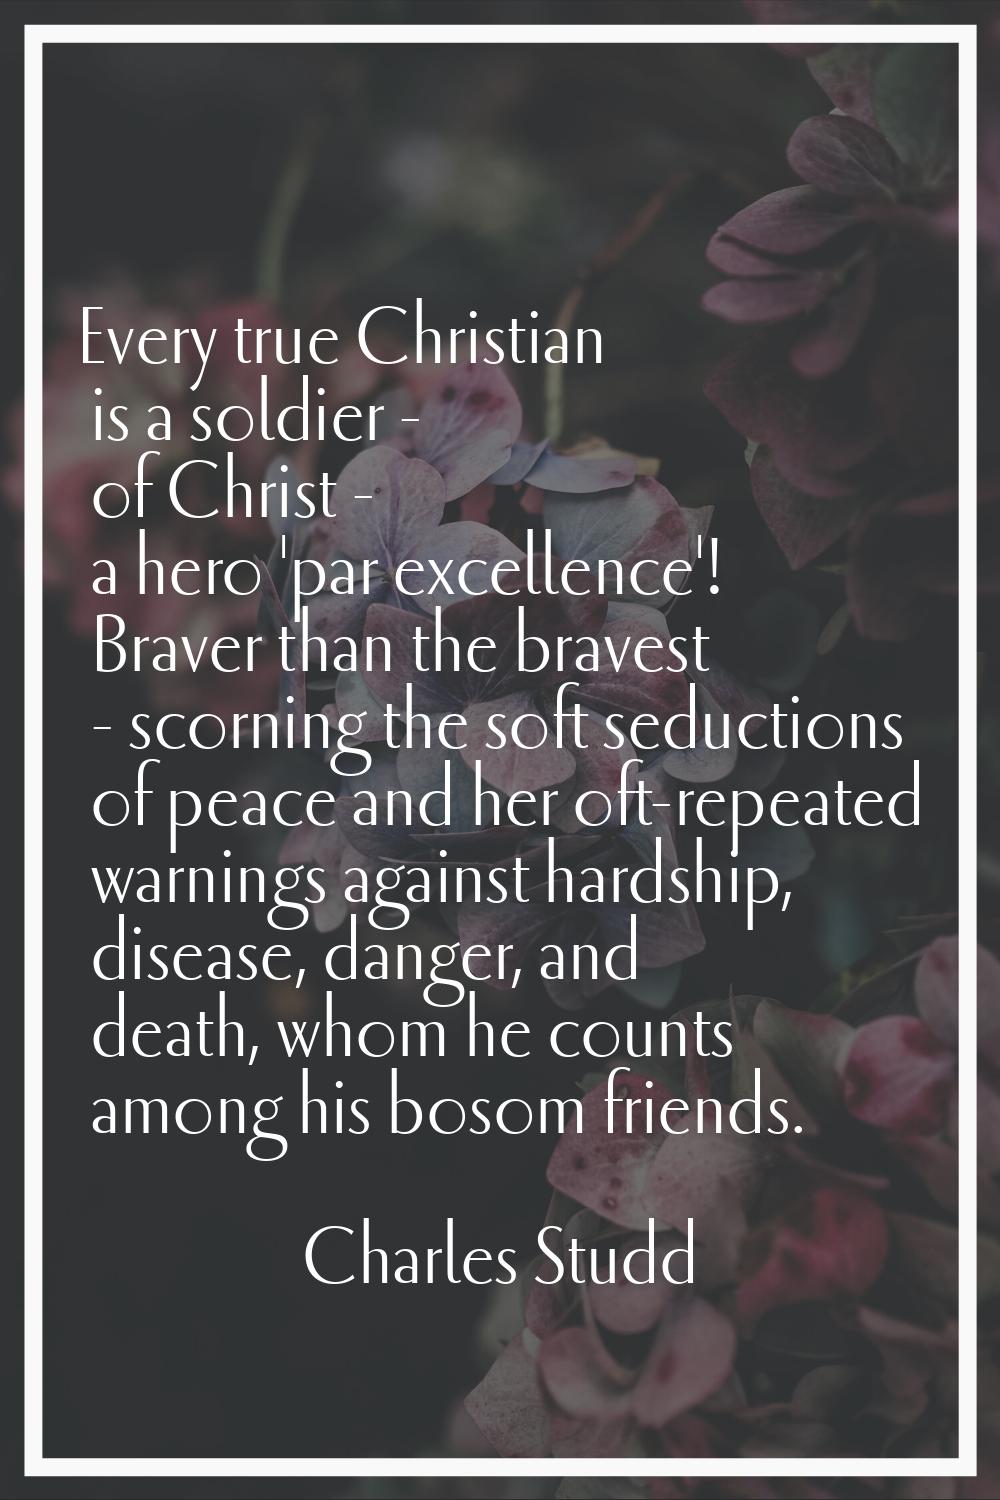 Every true Christian is a soldier - of Christ - a hero 'par excellence'! Braver than the bravest - 